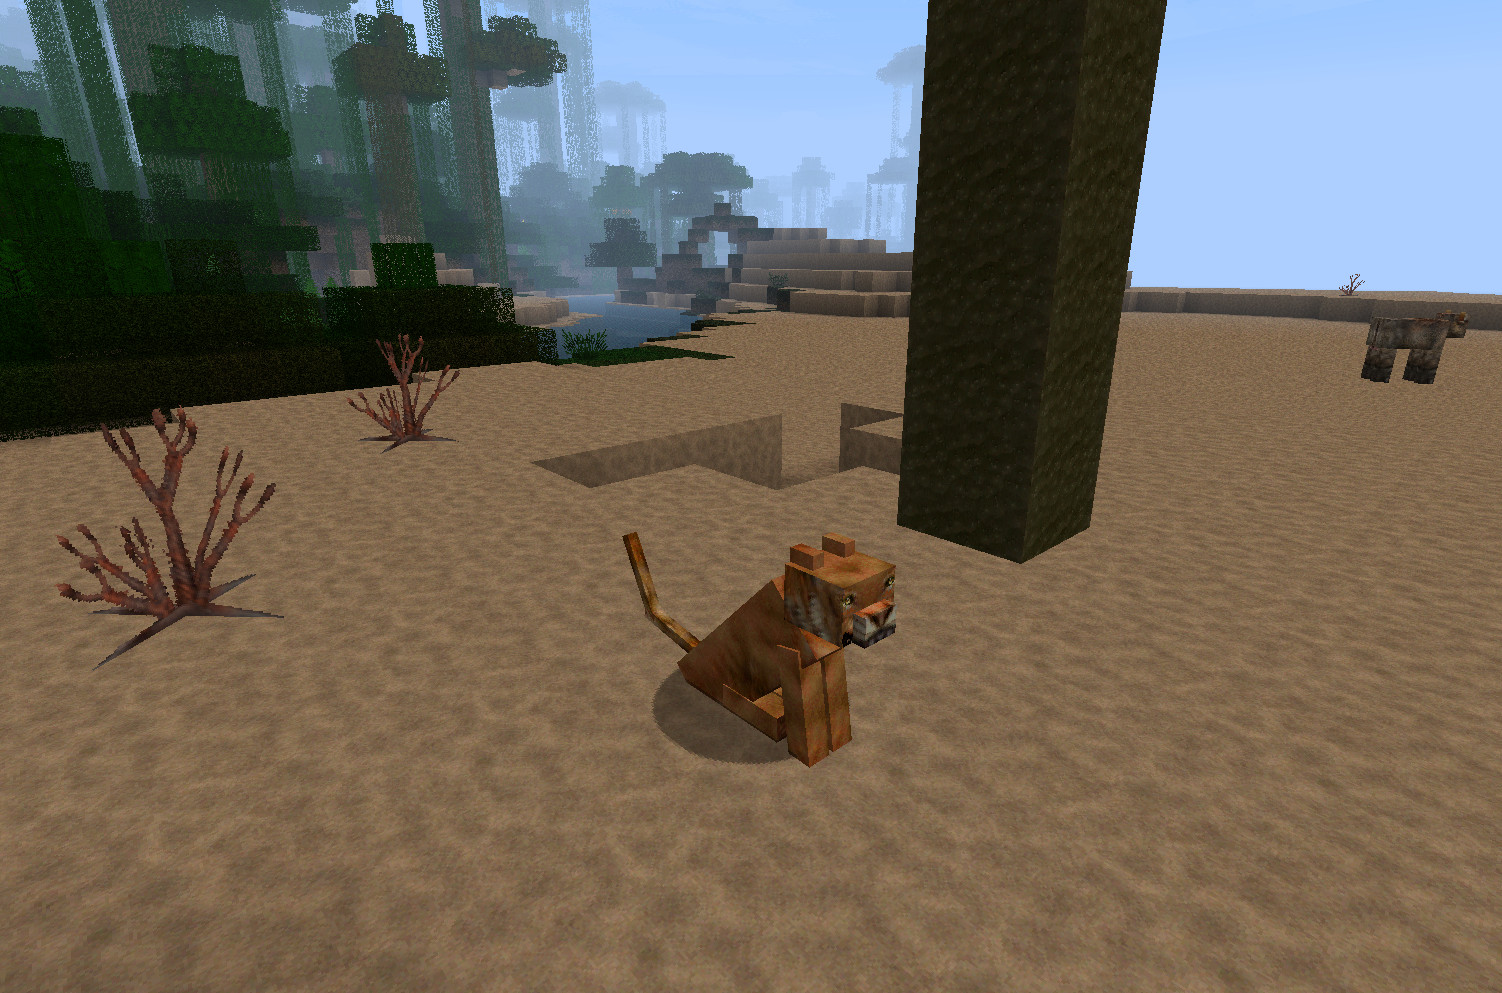 Cat image - Carnivores Resource Pack 128x mod for Minecraft.